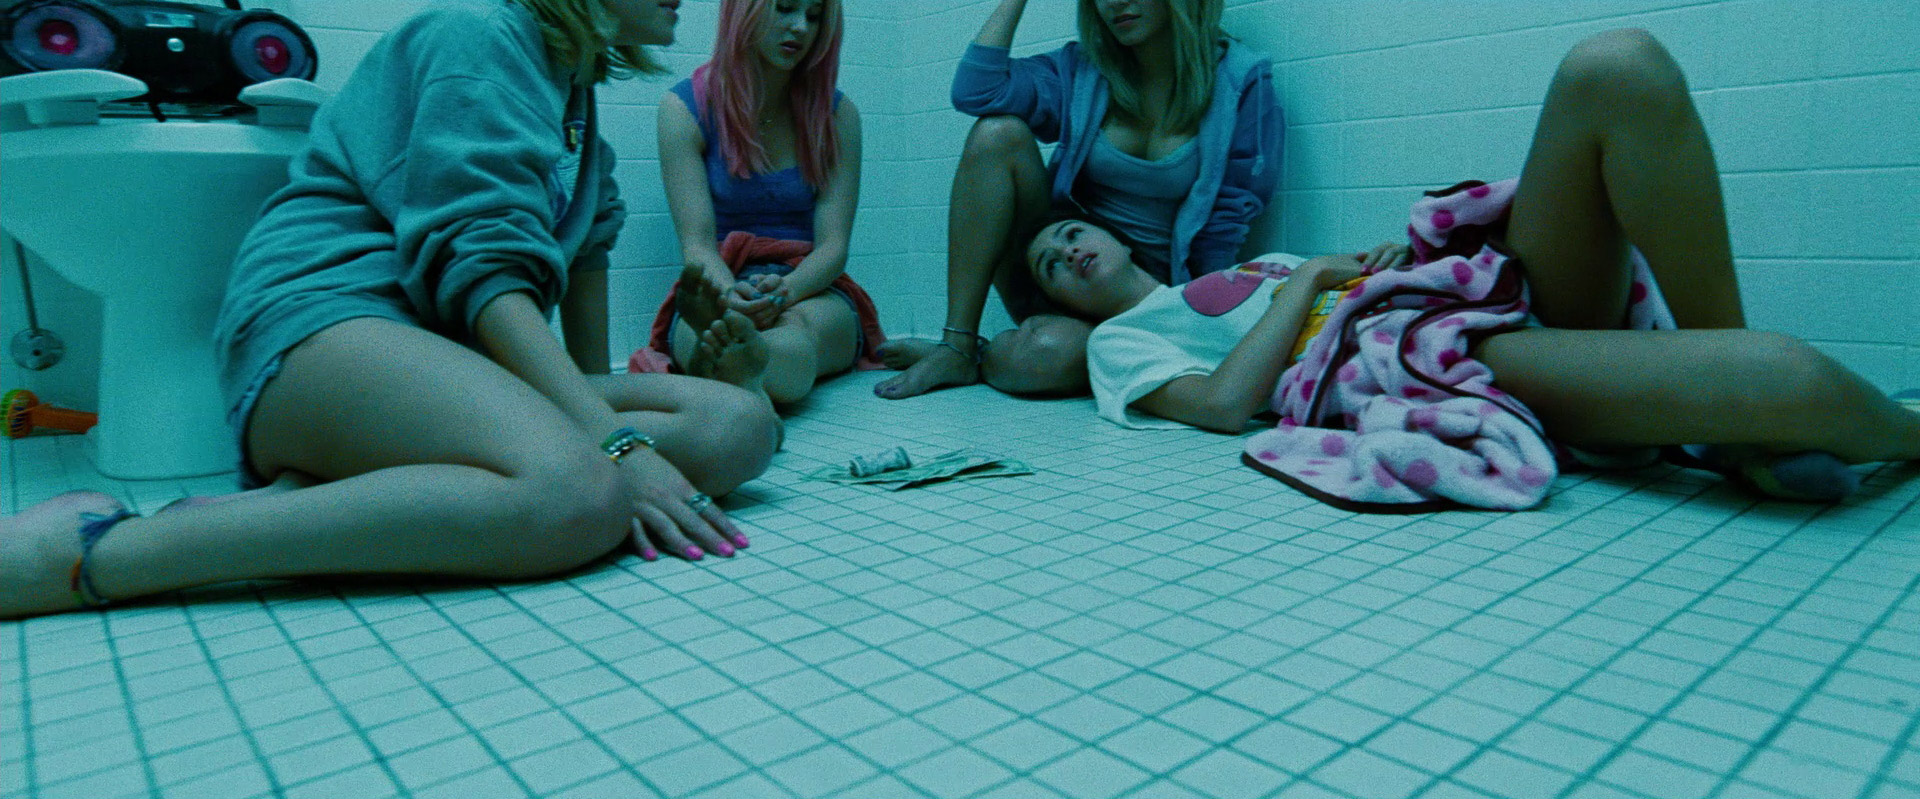 dhagash shah recommends Spring Breakers Pool Scene